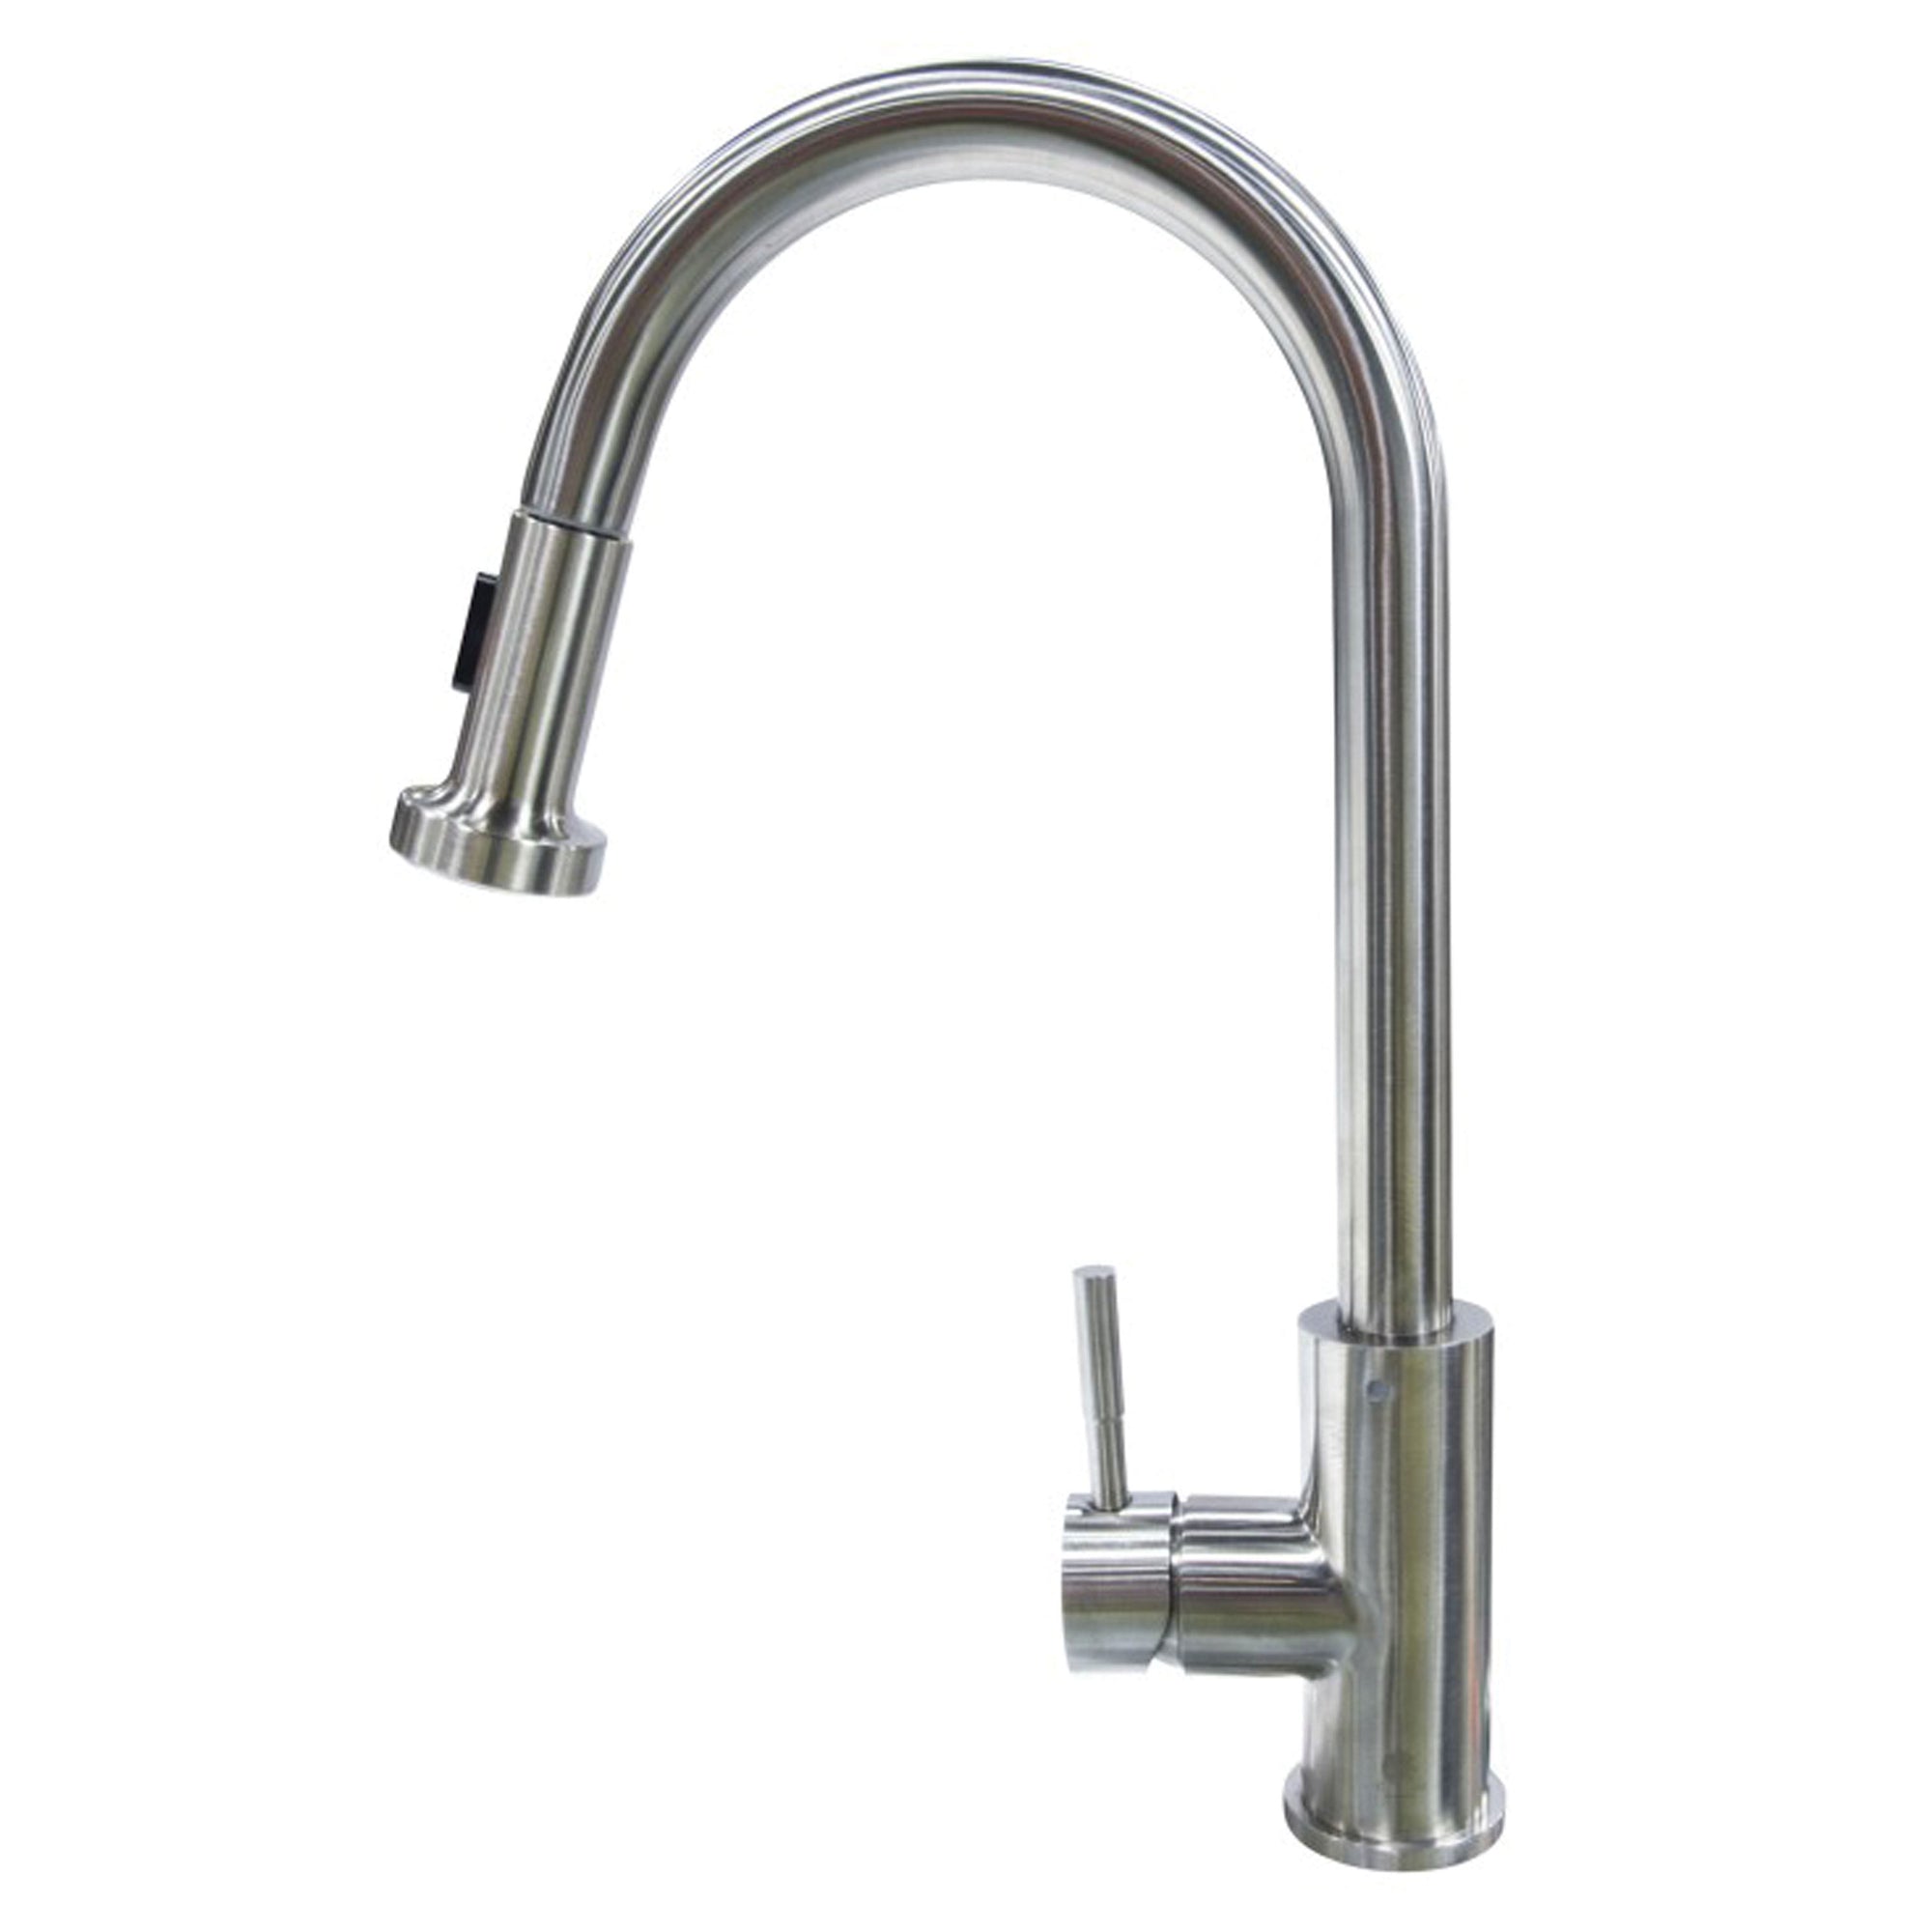 Lippert 719326 Pull Down Sprayer Faucet - Single Hole, Stainless Steel